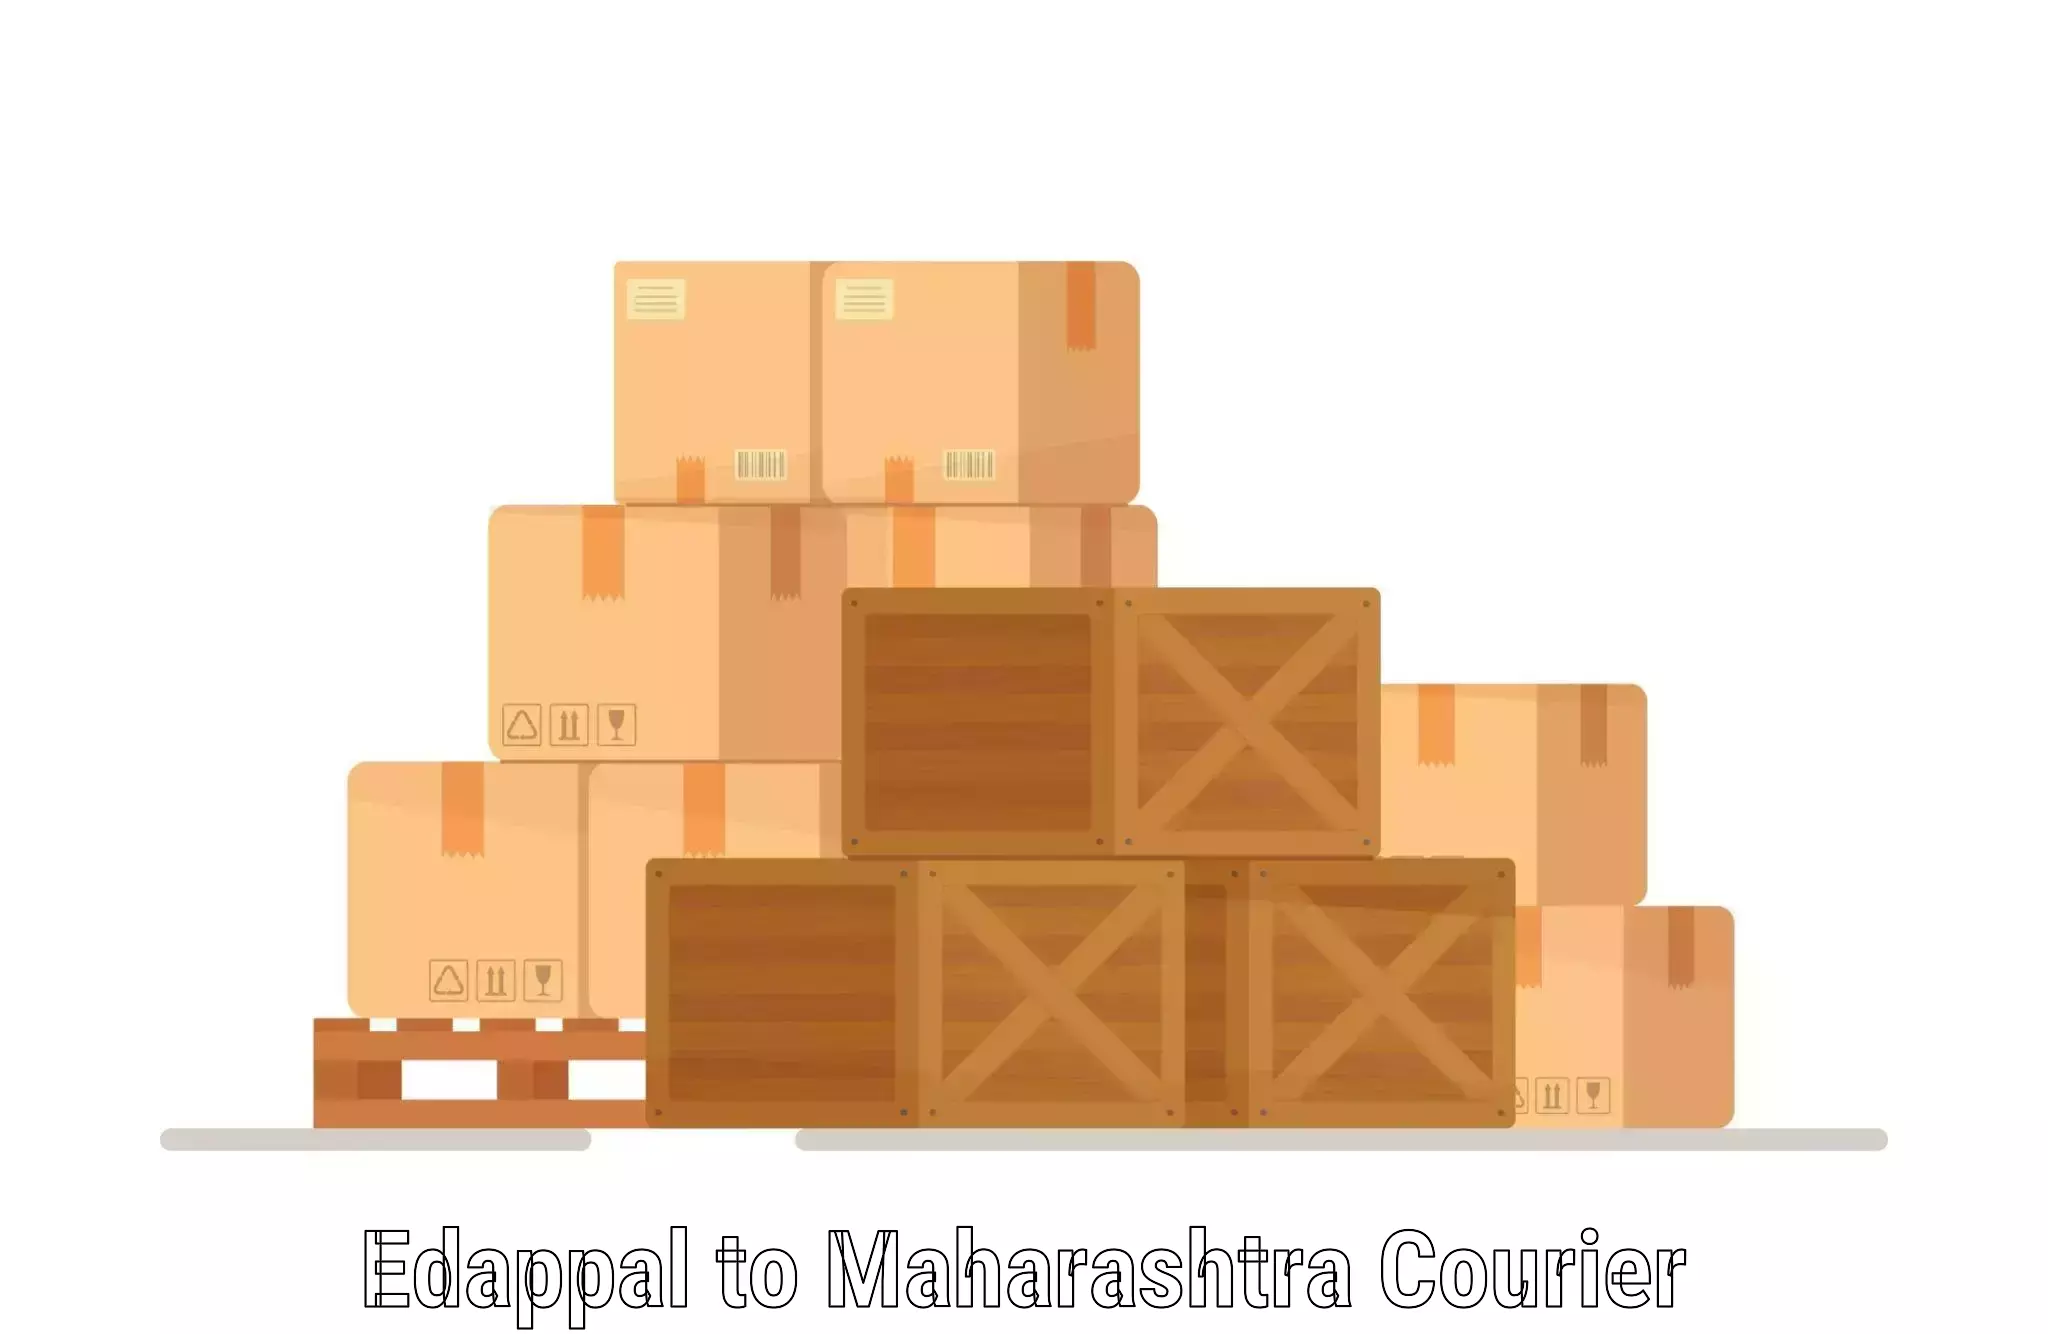 Customer-centric shipping Edappal to Dhule